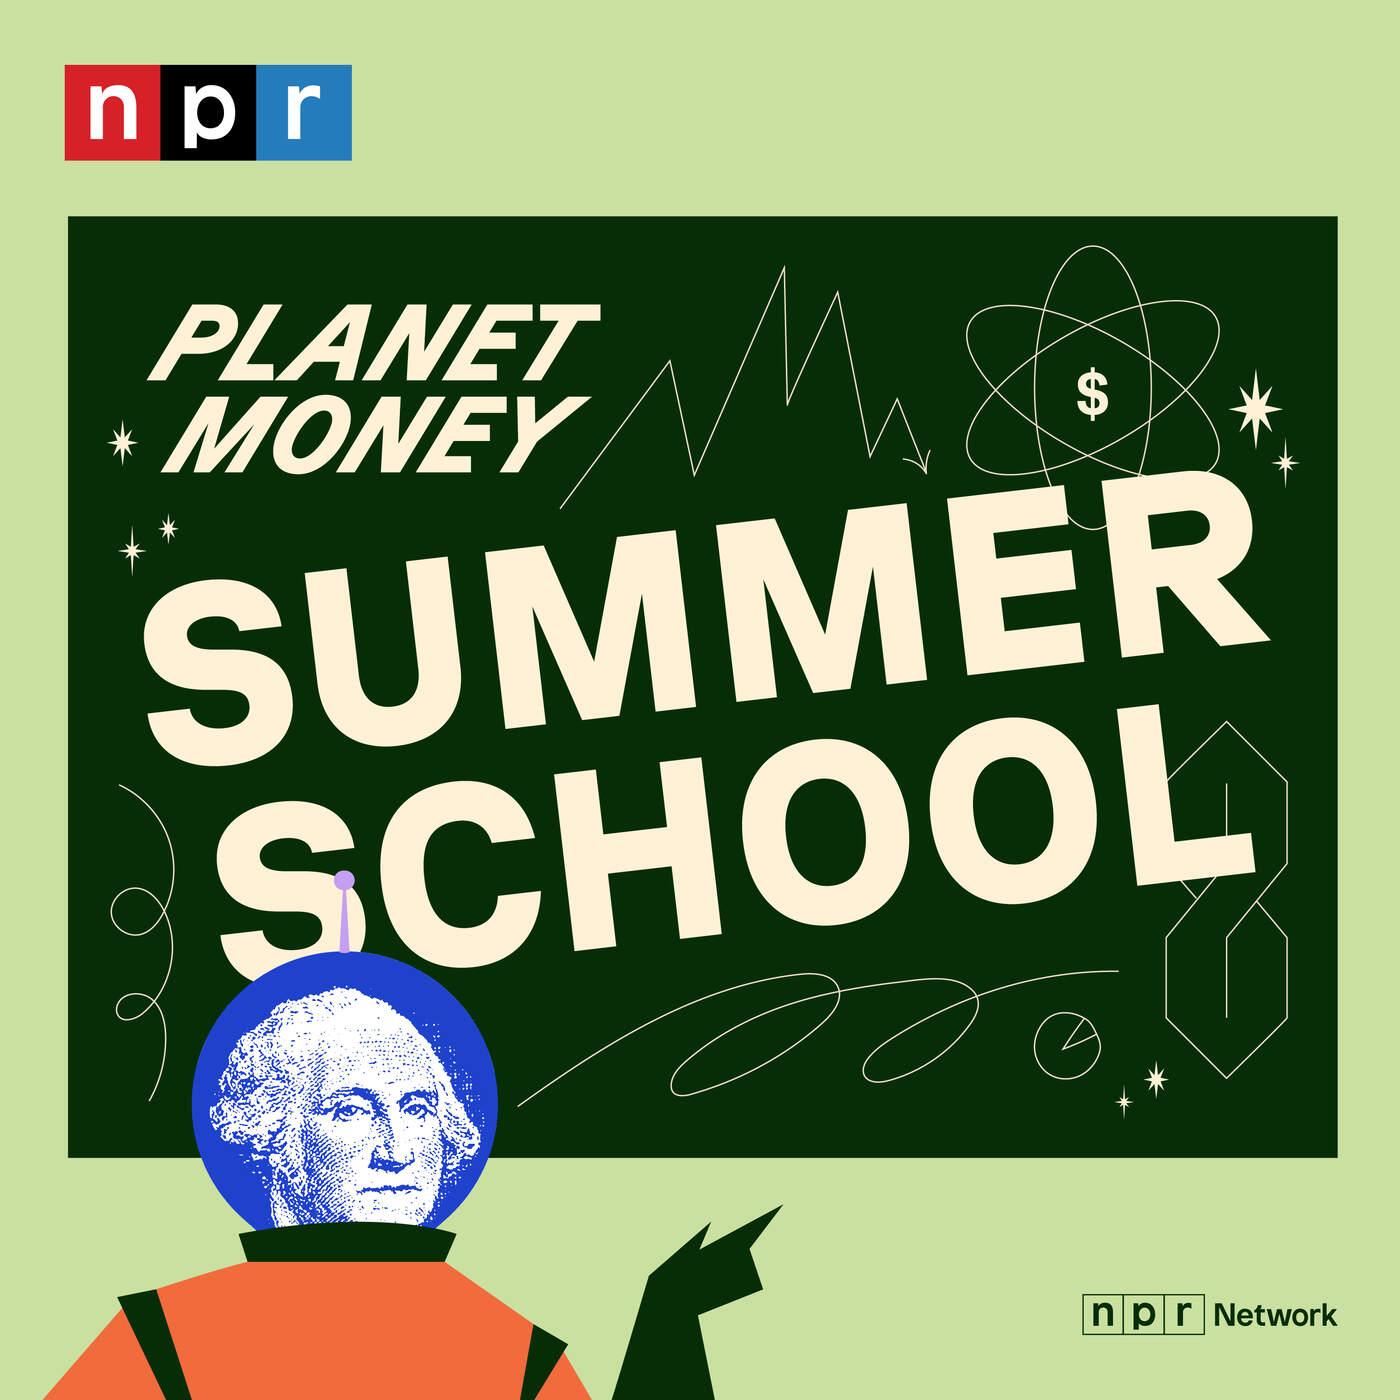 MBA 1: Planet Money goes to business school